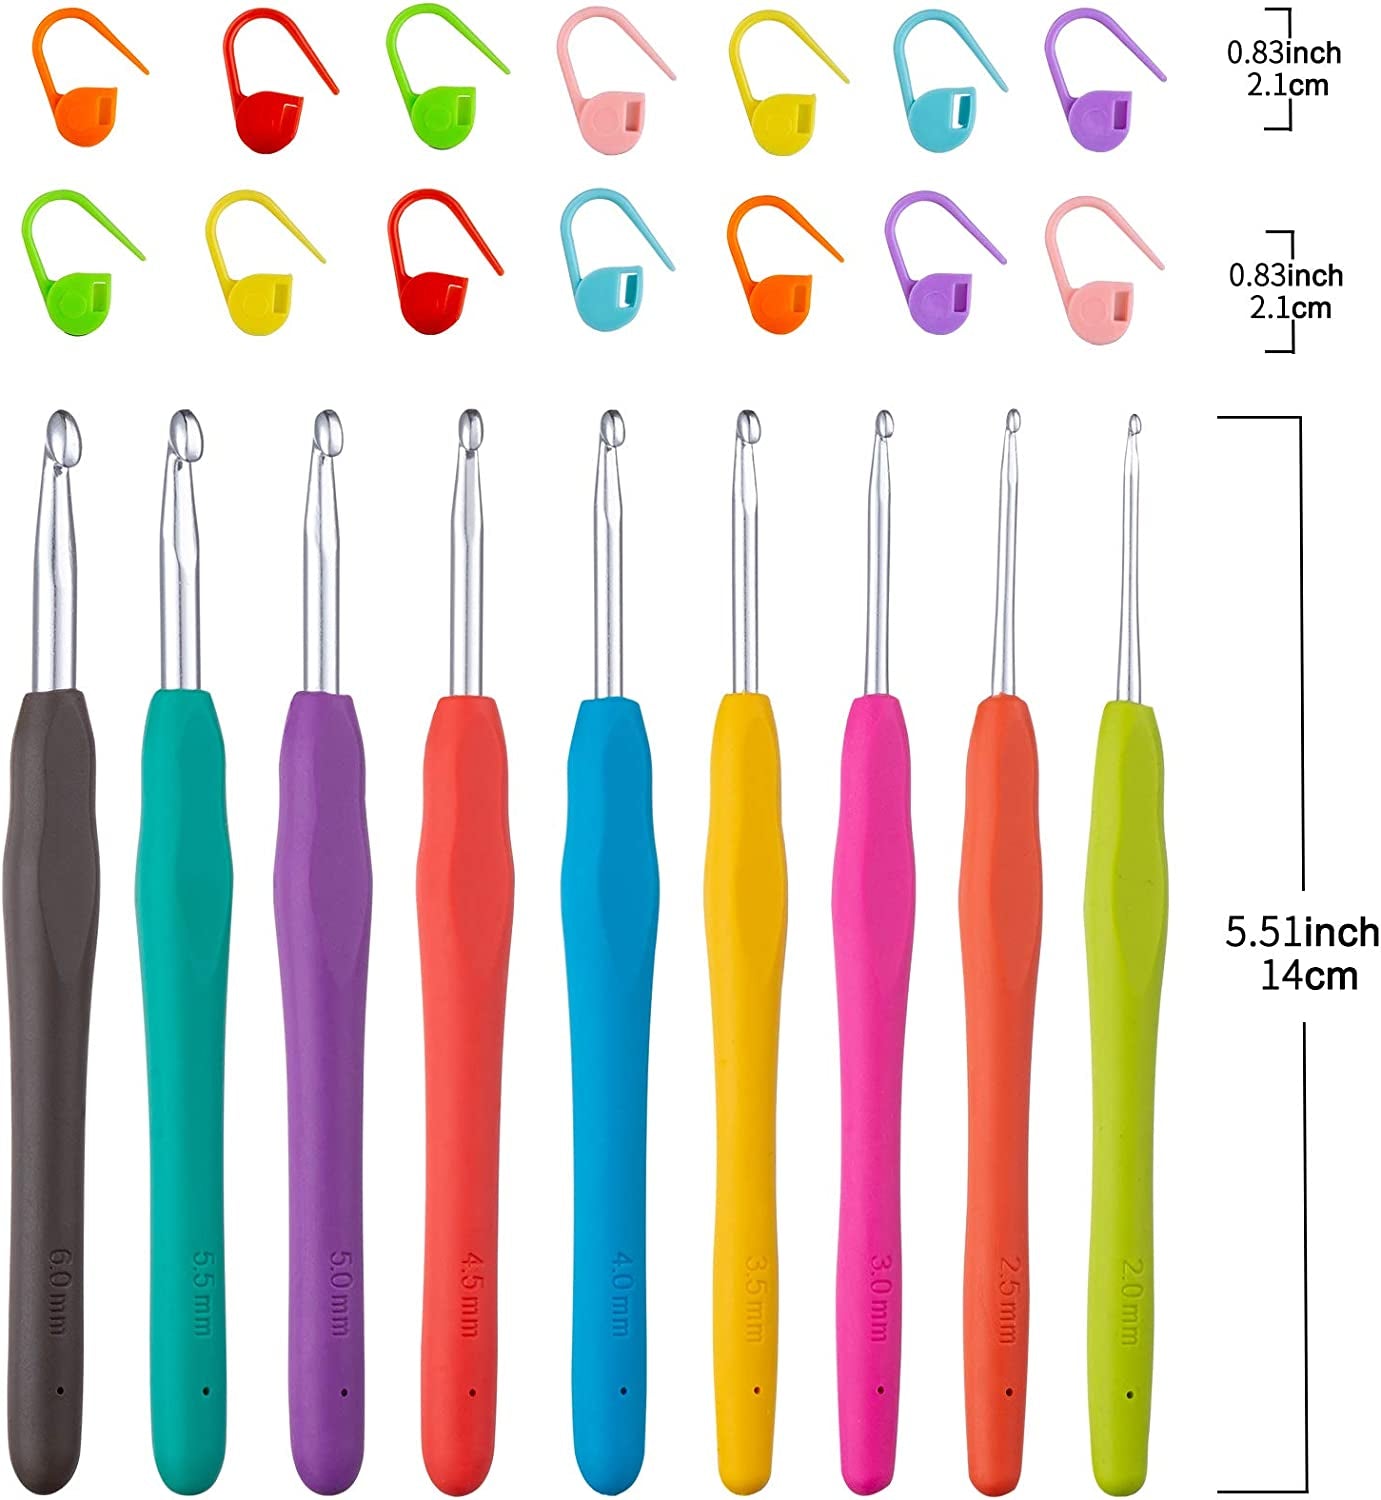 23 PCS Crochet Hooks, Ergonomic Handle Crochet Hooks Set for Arthritic Hands, Comfortable Smooth Crochet Needles Extra Long Knitting Needles with Stitch Markers, Rubber, Multicolor